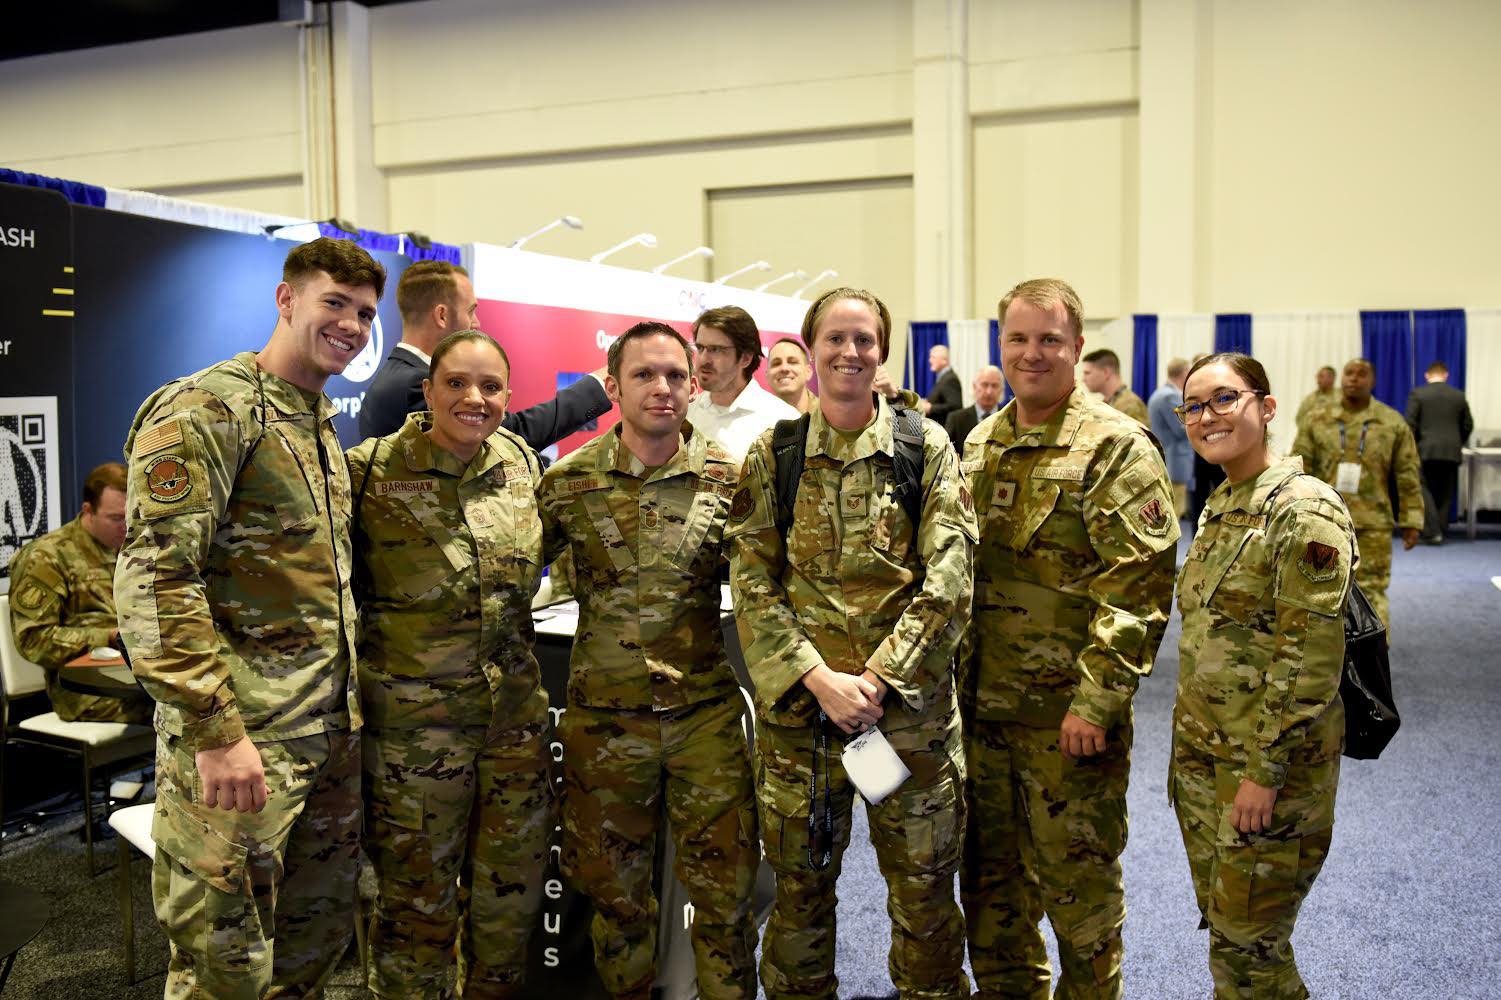 Members of the 350th Spectrum Warfare Wing while attending the Air Force Association Air, Space, &amp; Cyber Conference in Washington D.C. <em>Credit: 350th SWW</em>